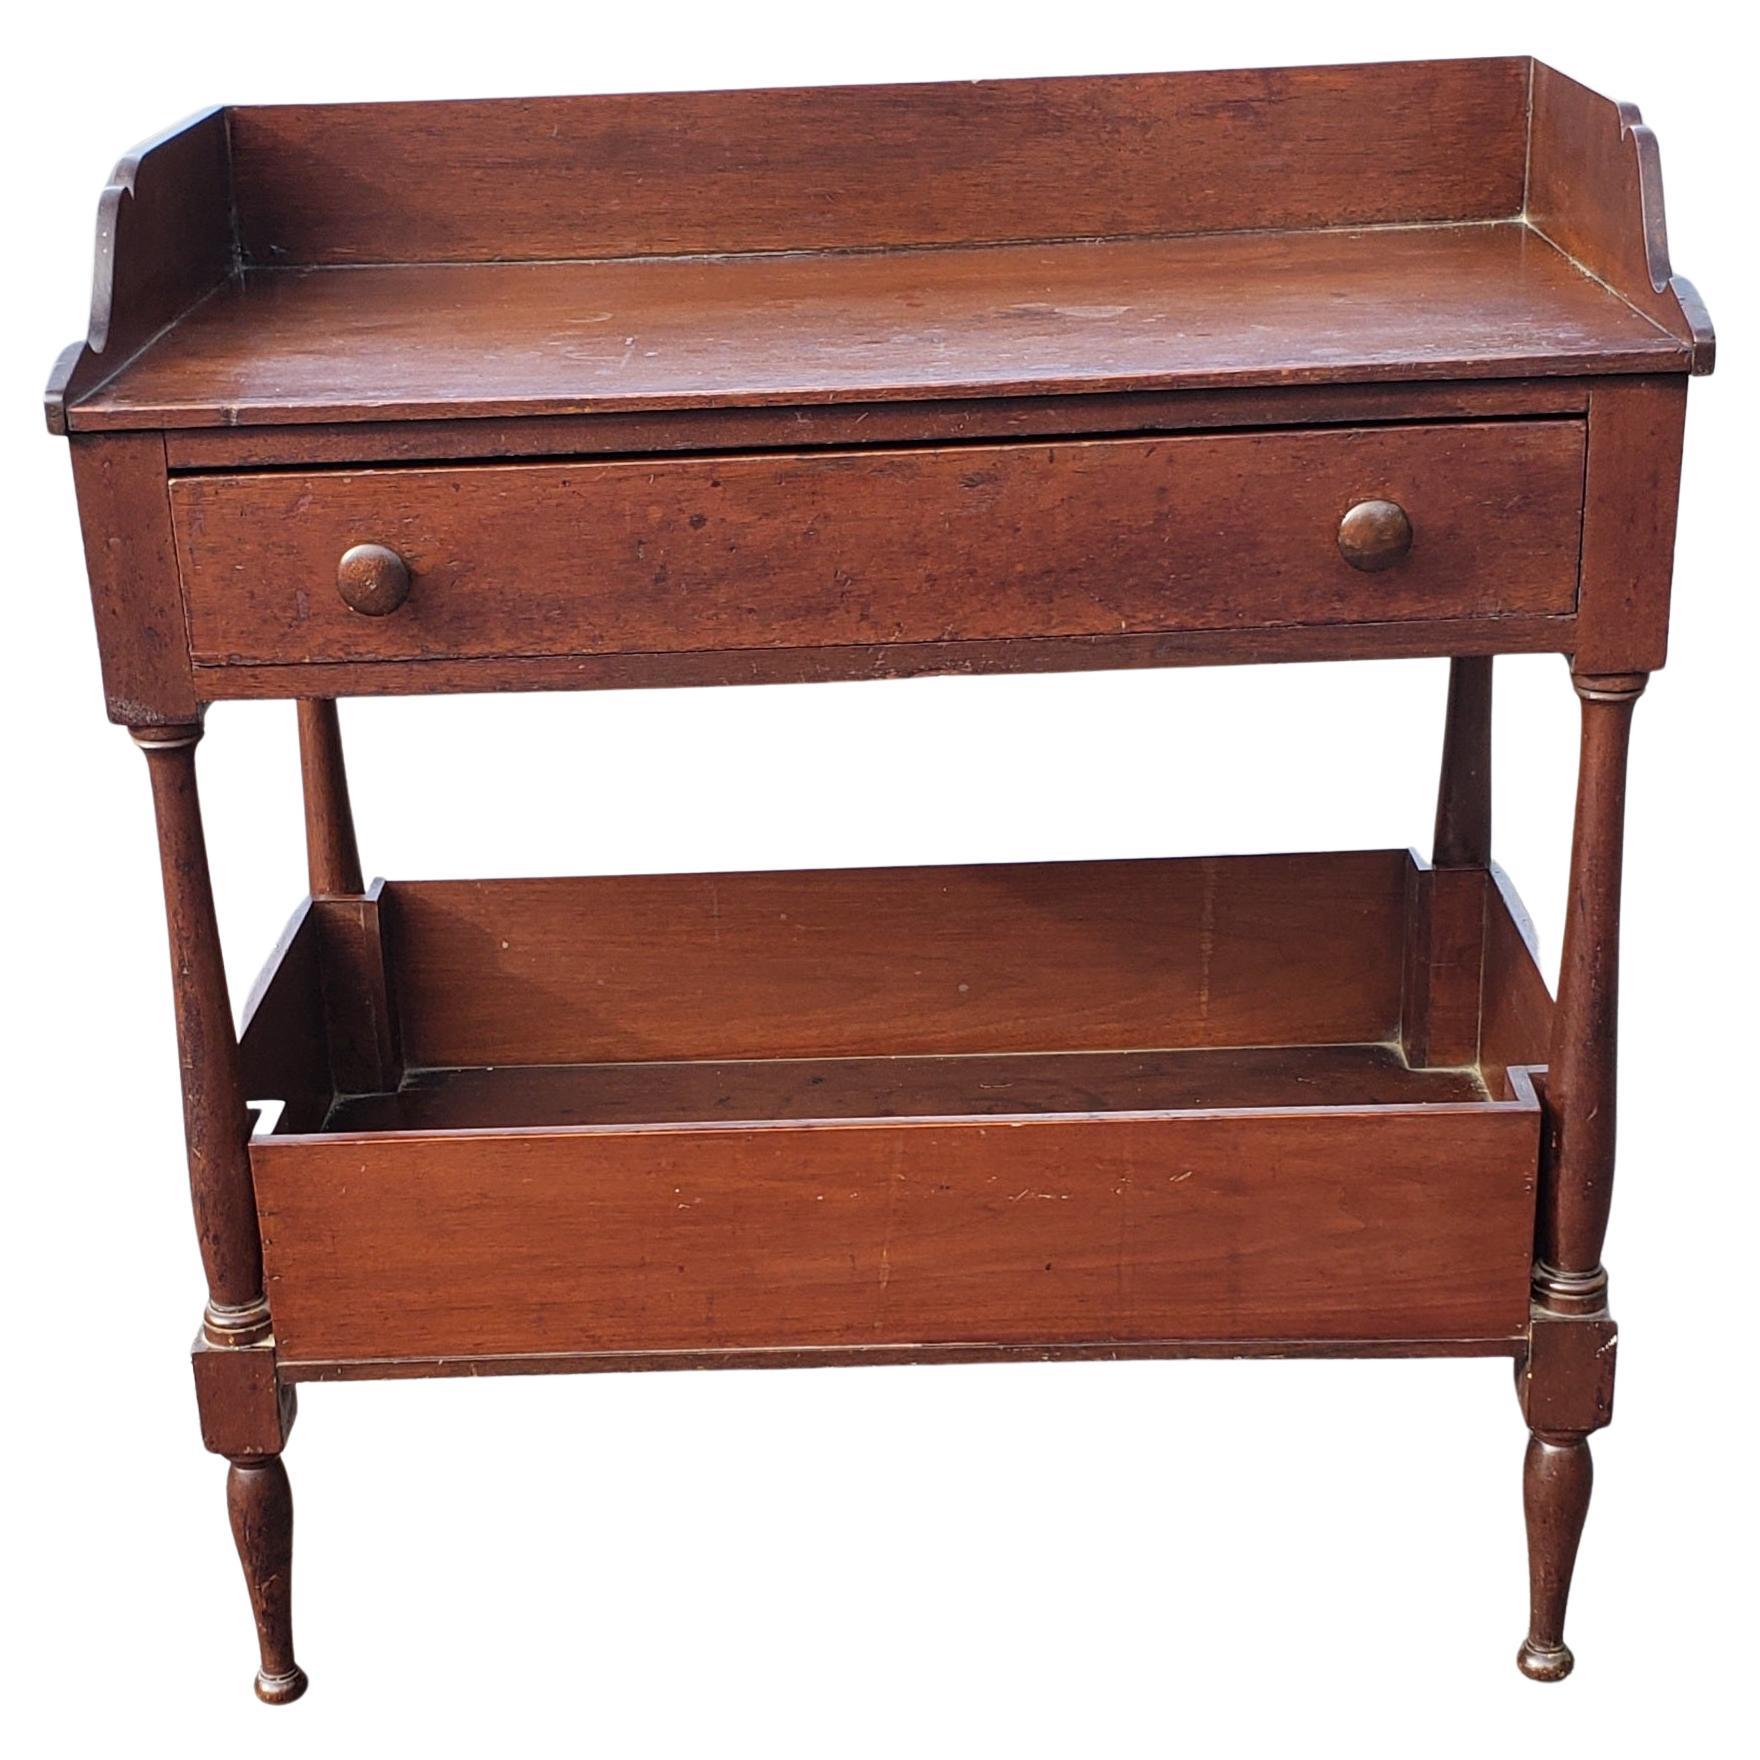 19th Century Walnut Tiered Washstand or Work Table with Drawer and Open Storage